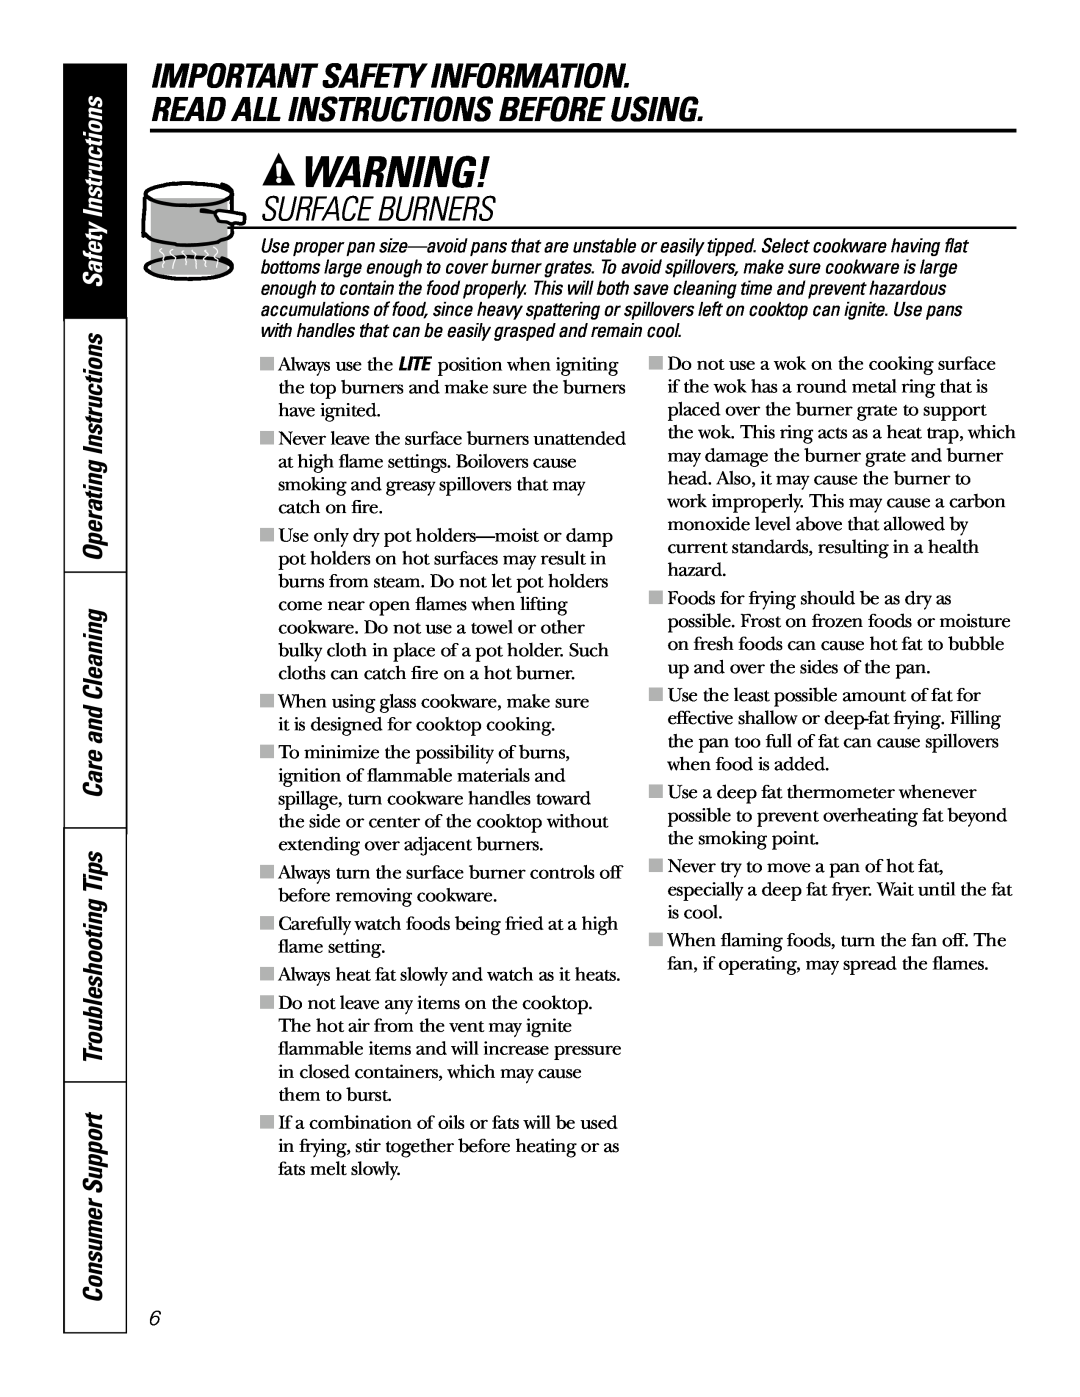 GE JGP989 manual Important Safety Information, Read All Instructions Before Using, Surface Burners, Safety Instructions 